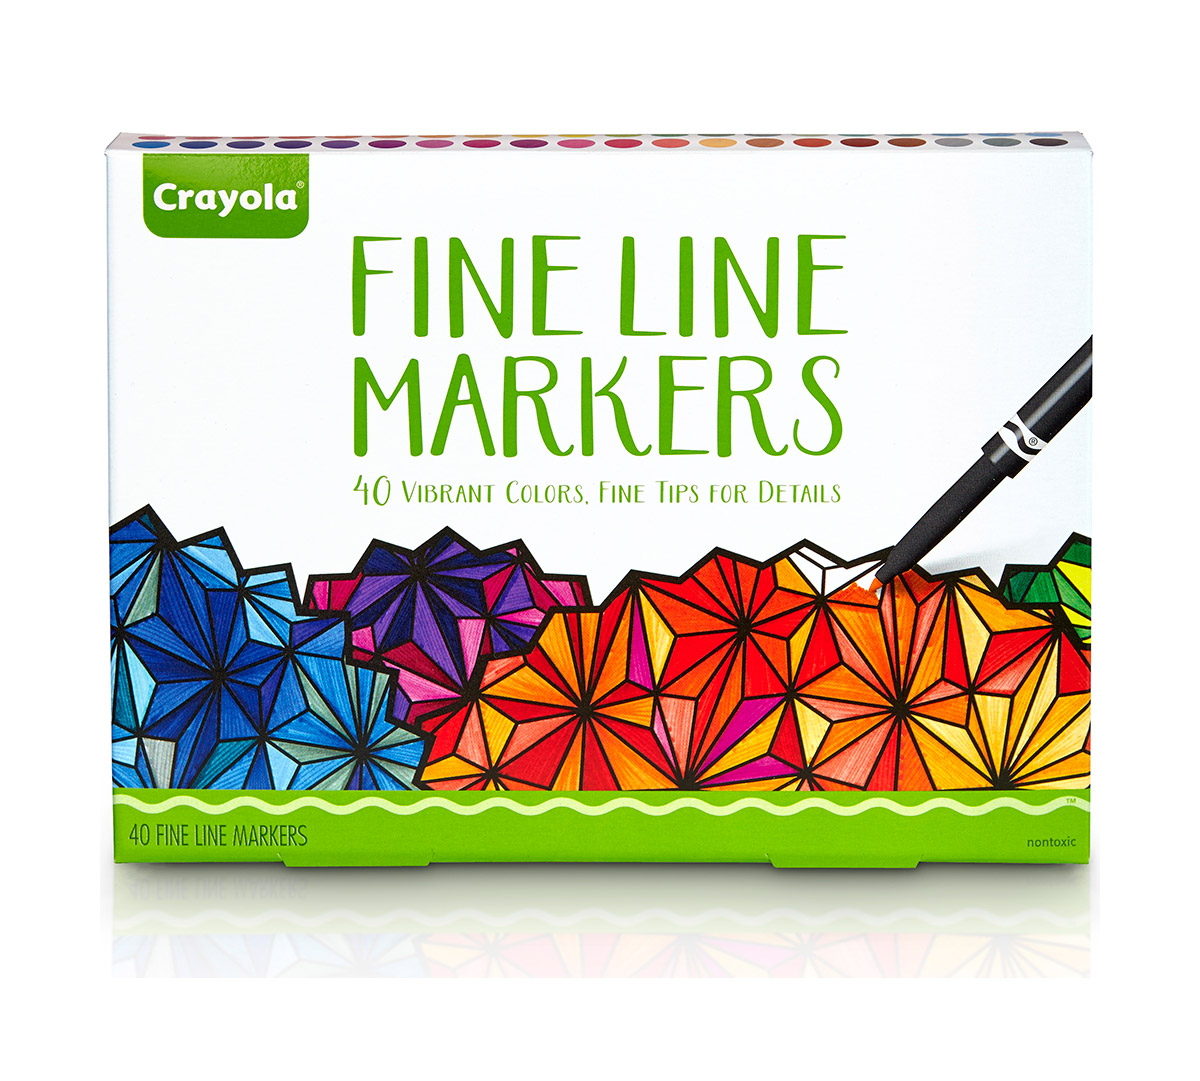 Crayola Creative Escapes Adult Coloring Set. New In Box